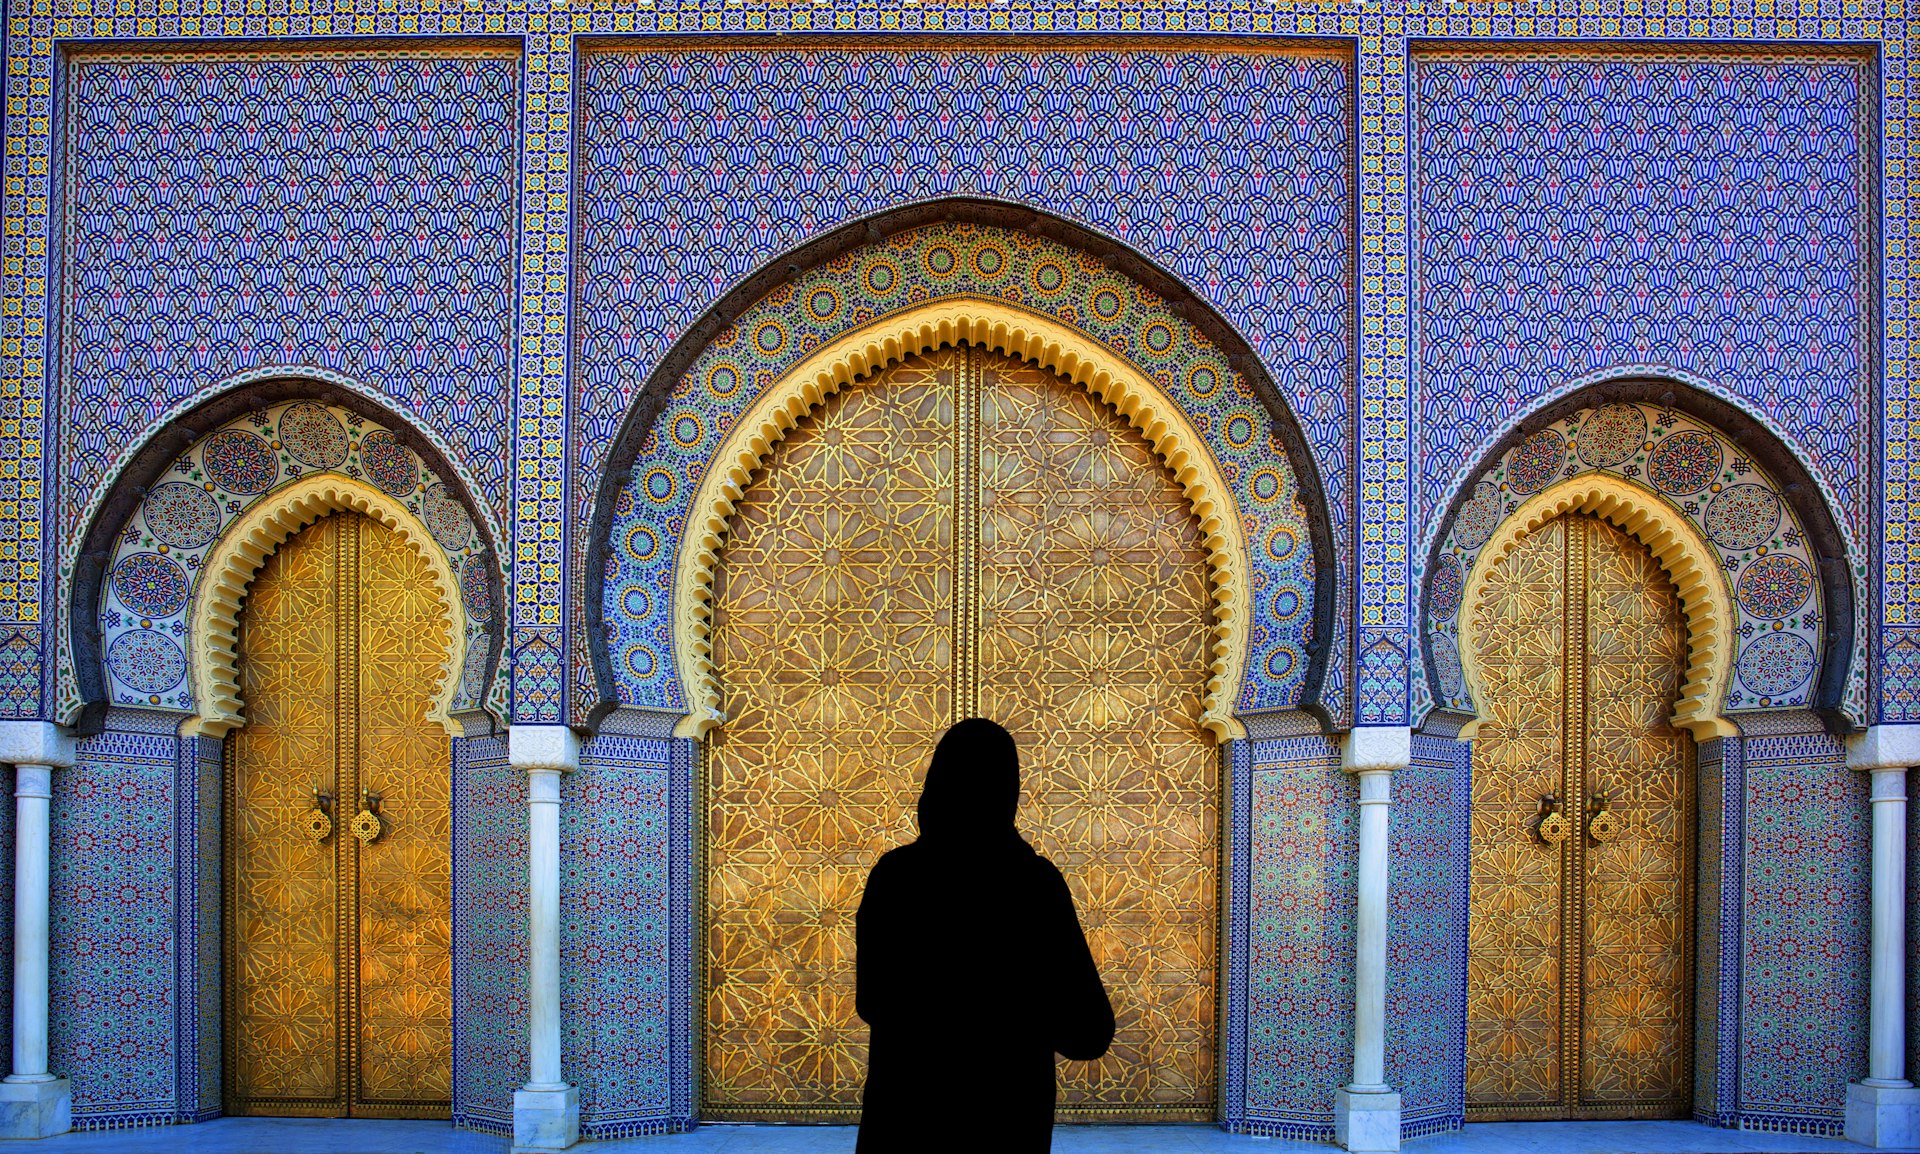 A woman in black stands in front of ornately decorated doors in Fez, Morocco